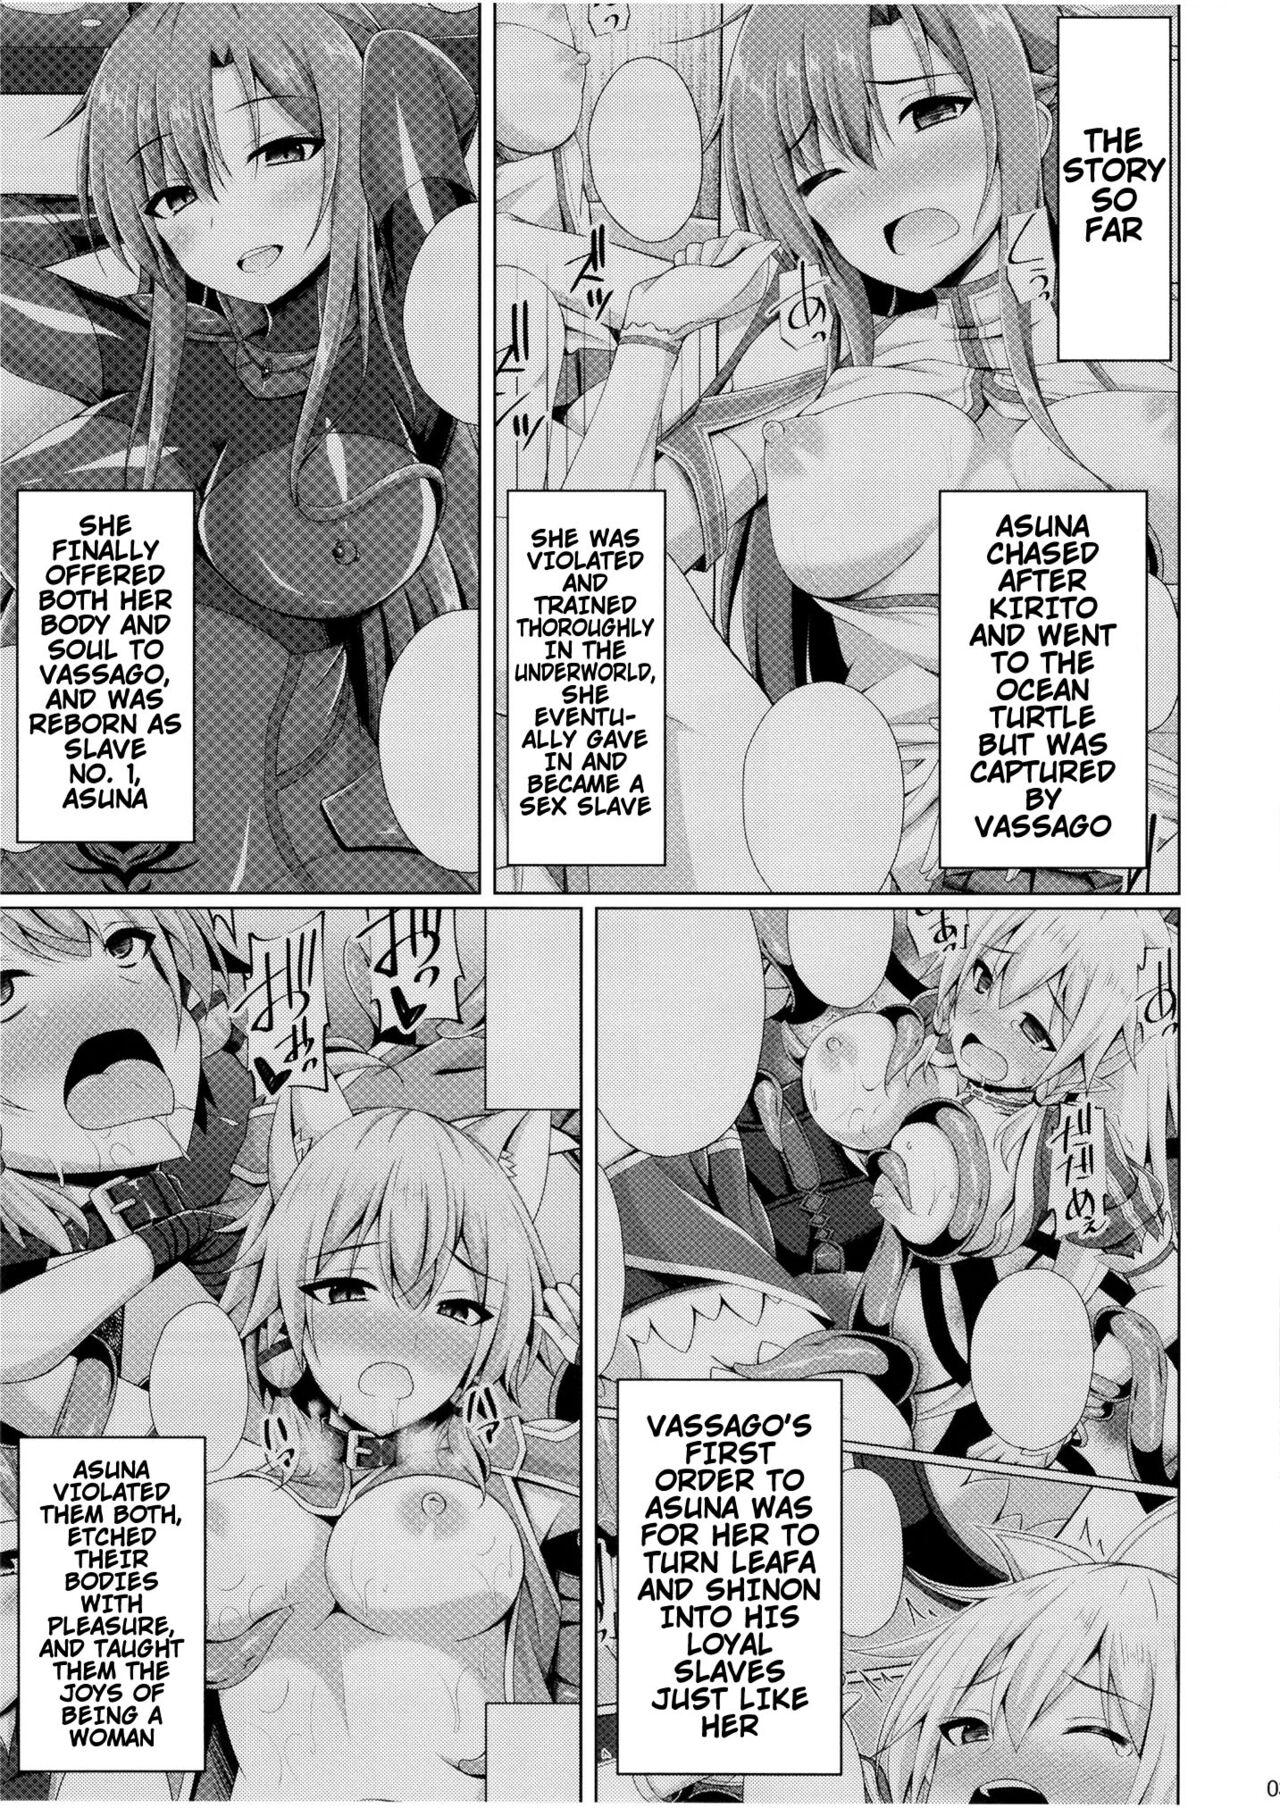 Pure 18 Kuro no Kenshito Yobareta Ore wa mou nai... | There's Nothing Left Of Me From When I Was The Black Knight - Sword art online Hot Wife - Page 2